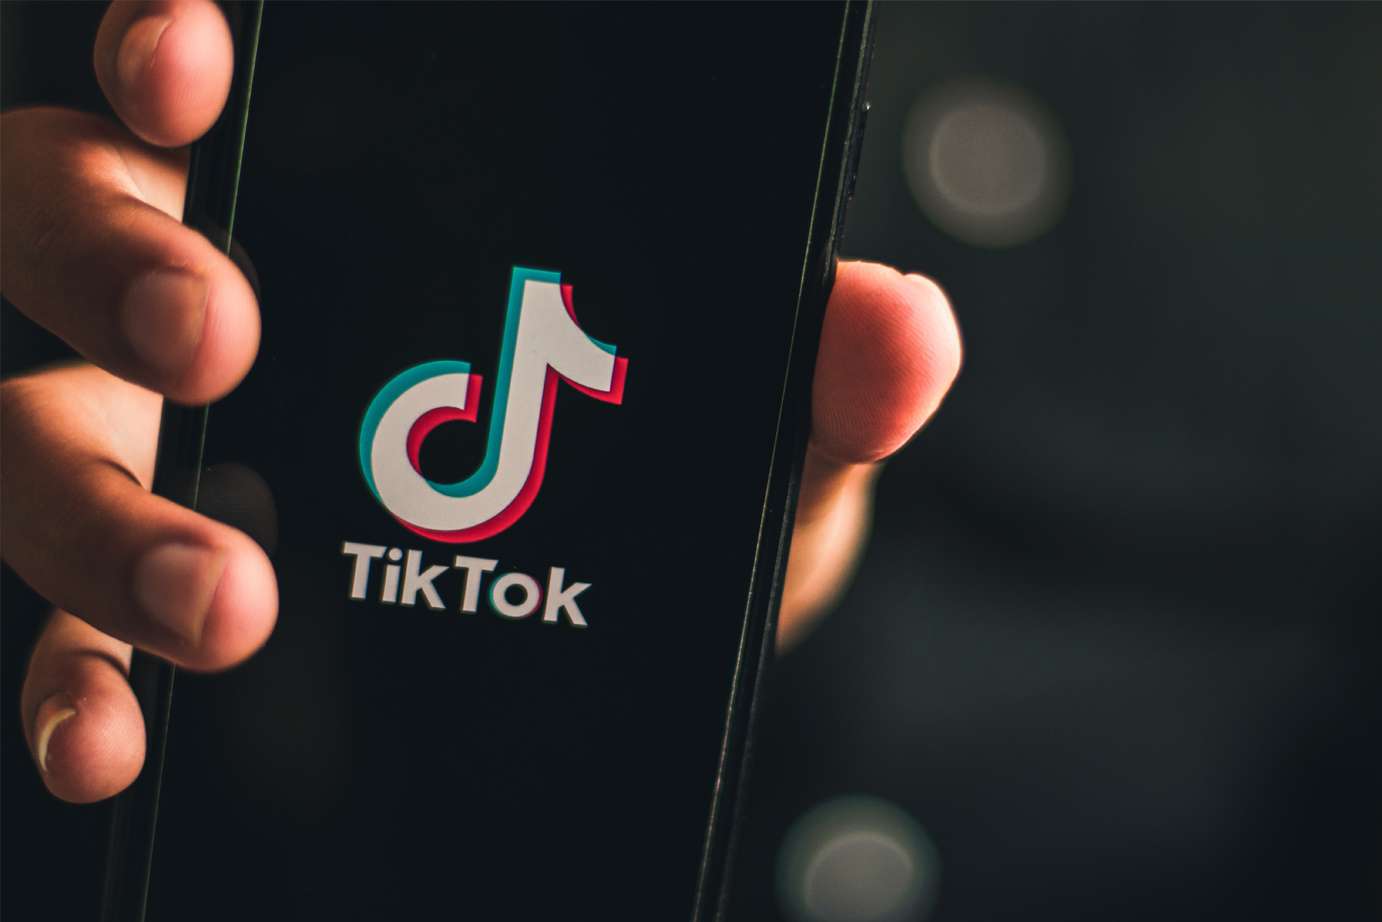 What the Potential TikTok Ban Could Mean for Media Plans